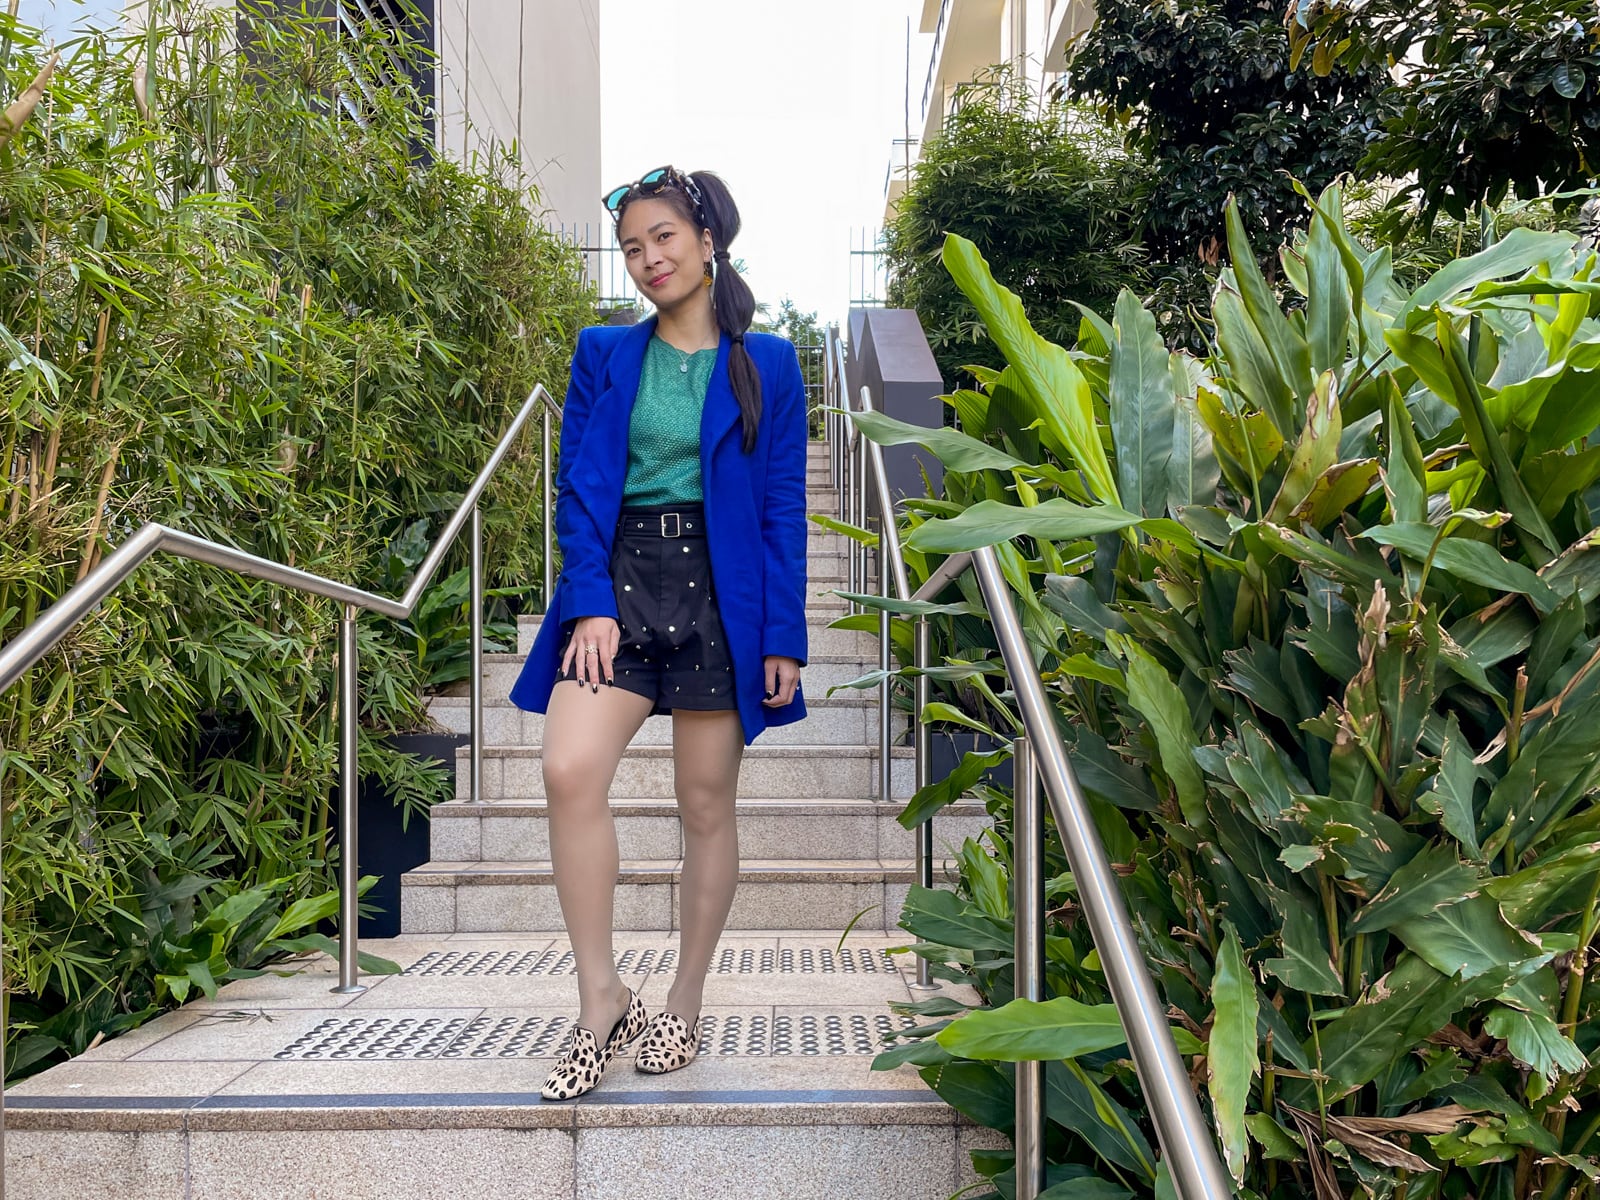 An Asian woman with dark hair tied in a ponytail with tied sections, standing on a set of concrete stairs. She is wearing a bright blue coat, a green top and black shorts, and giraffe print loafers. She has sunglasses on top of her head.